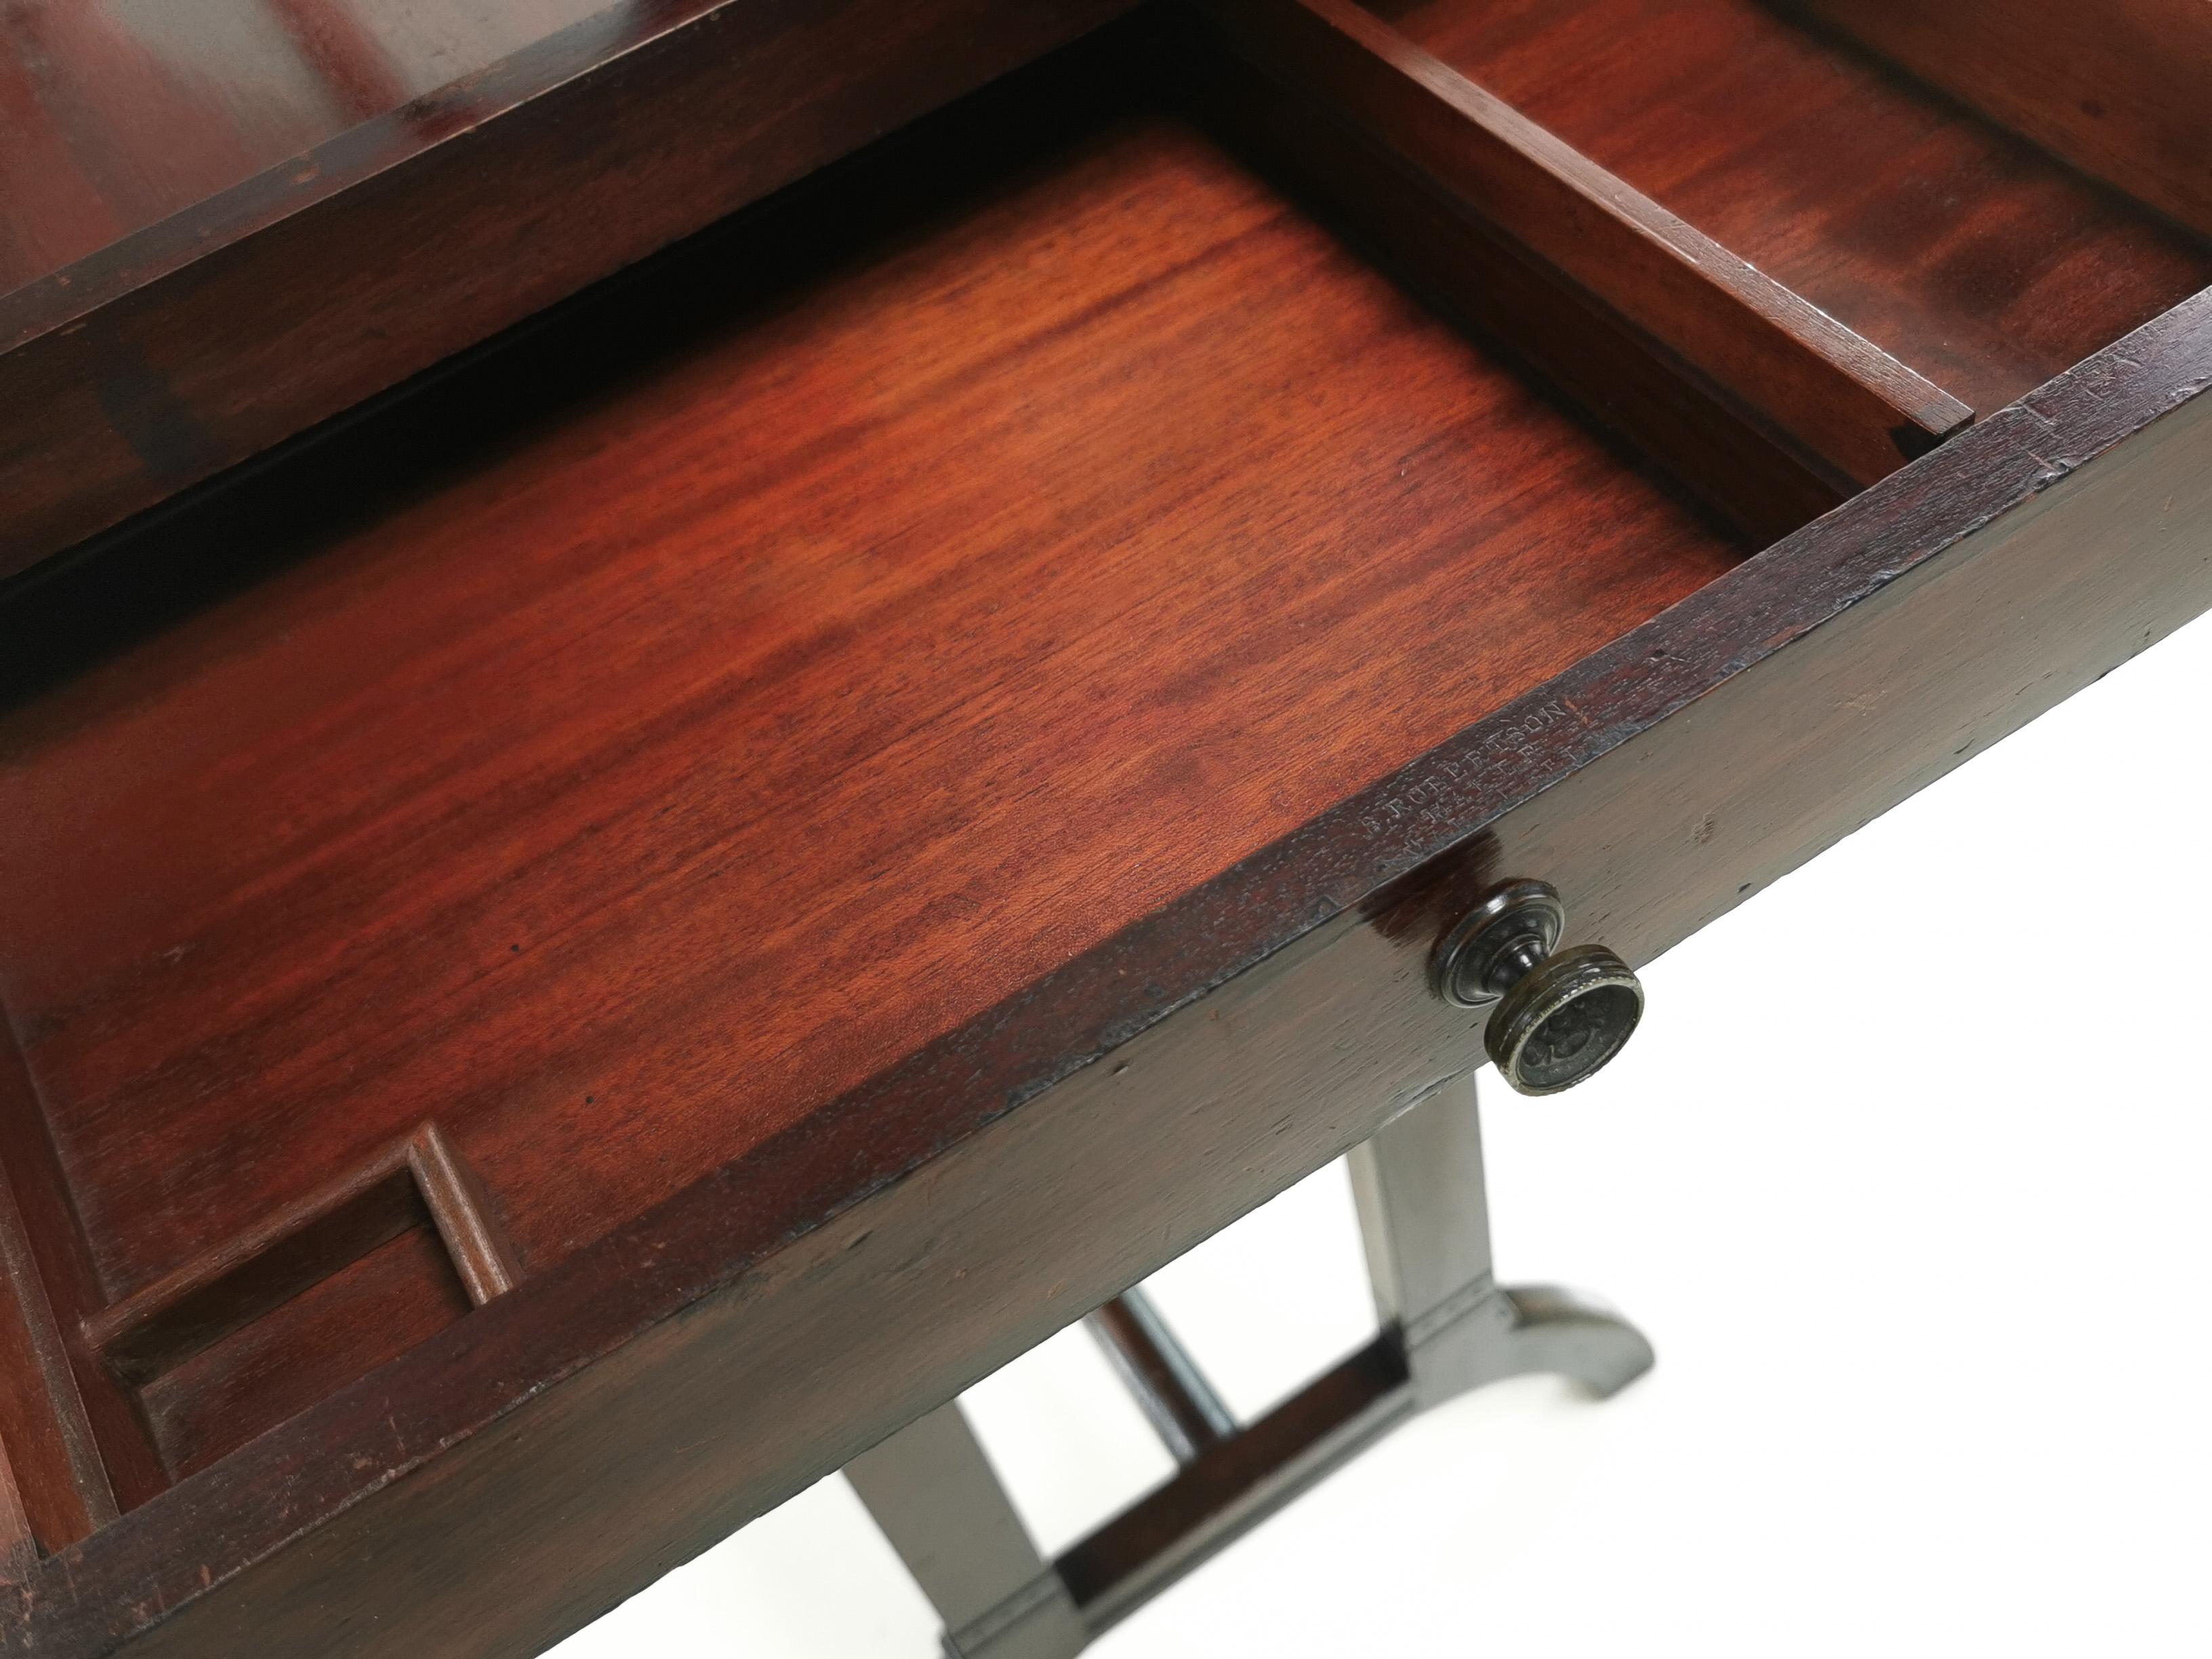 Edwardian architects table

A mahogany architects table with a single sectioned drawer. 

Featuring a rise and fall adjustable top. 

Stamped by the cabinet maker 